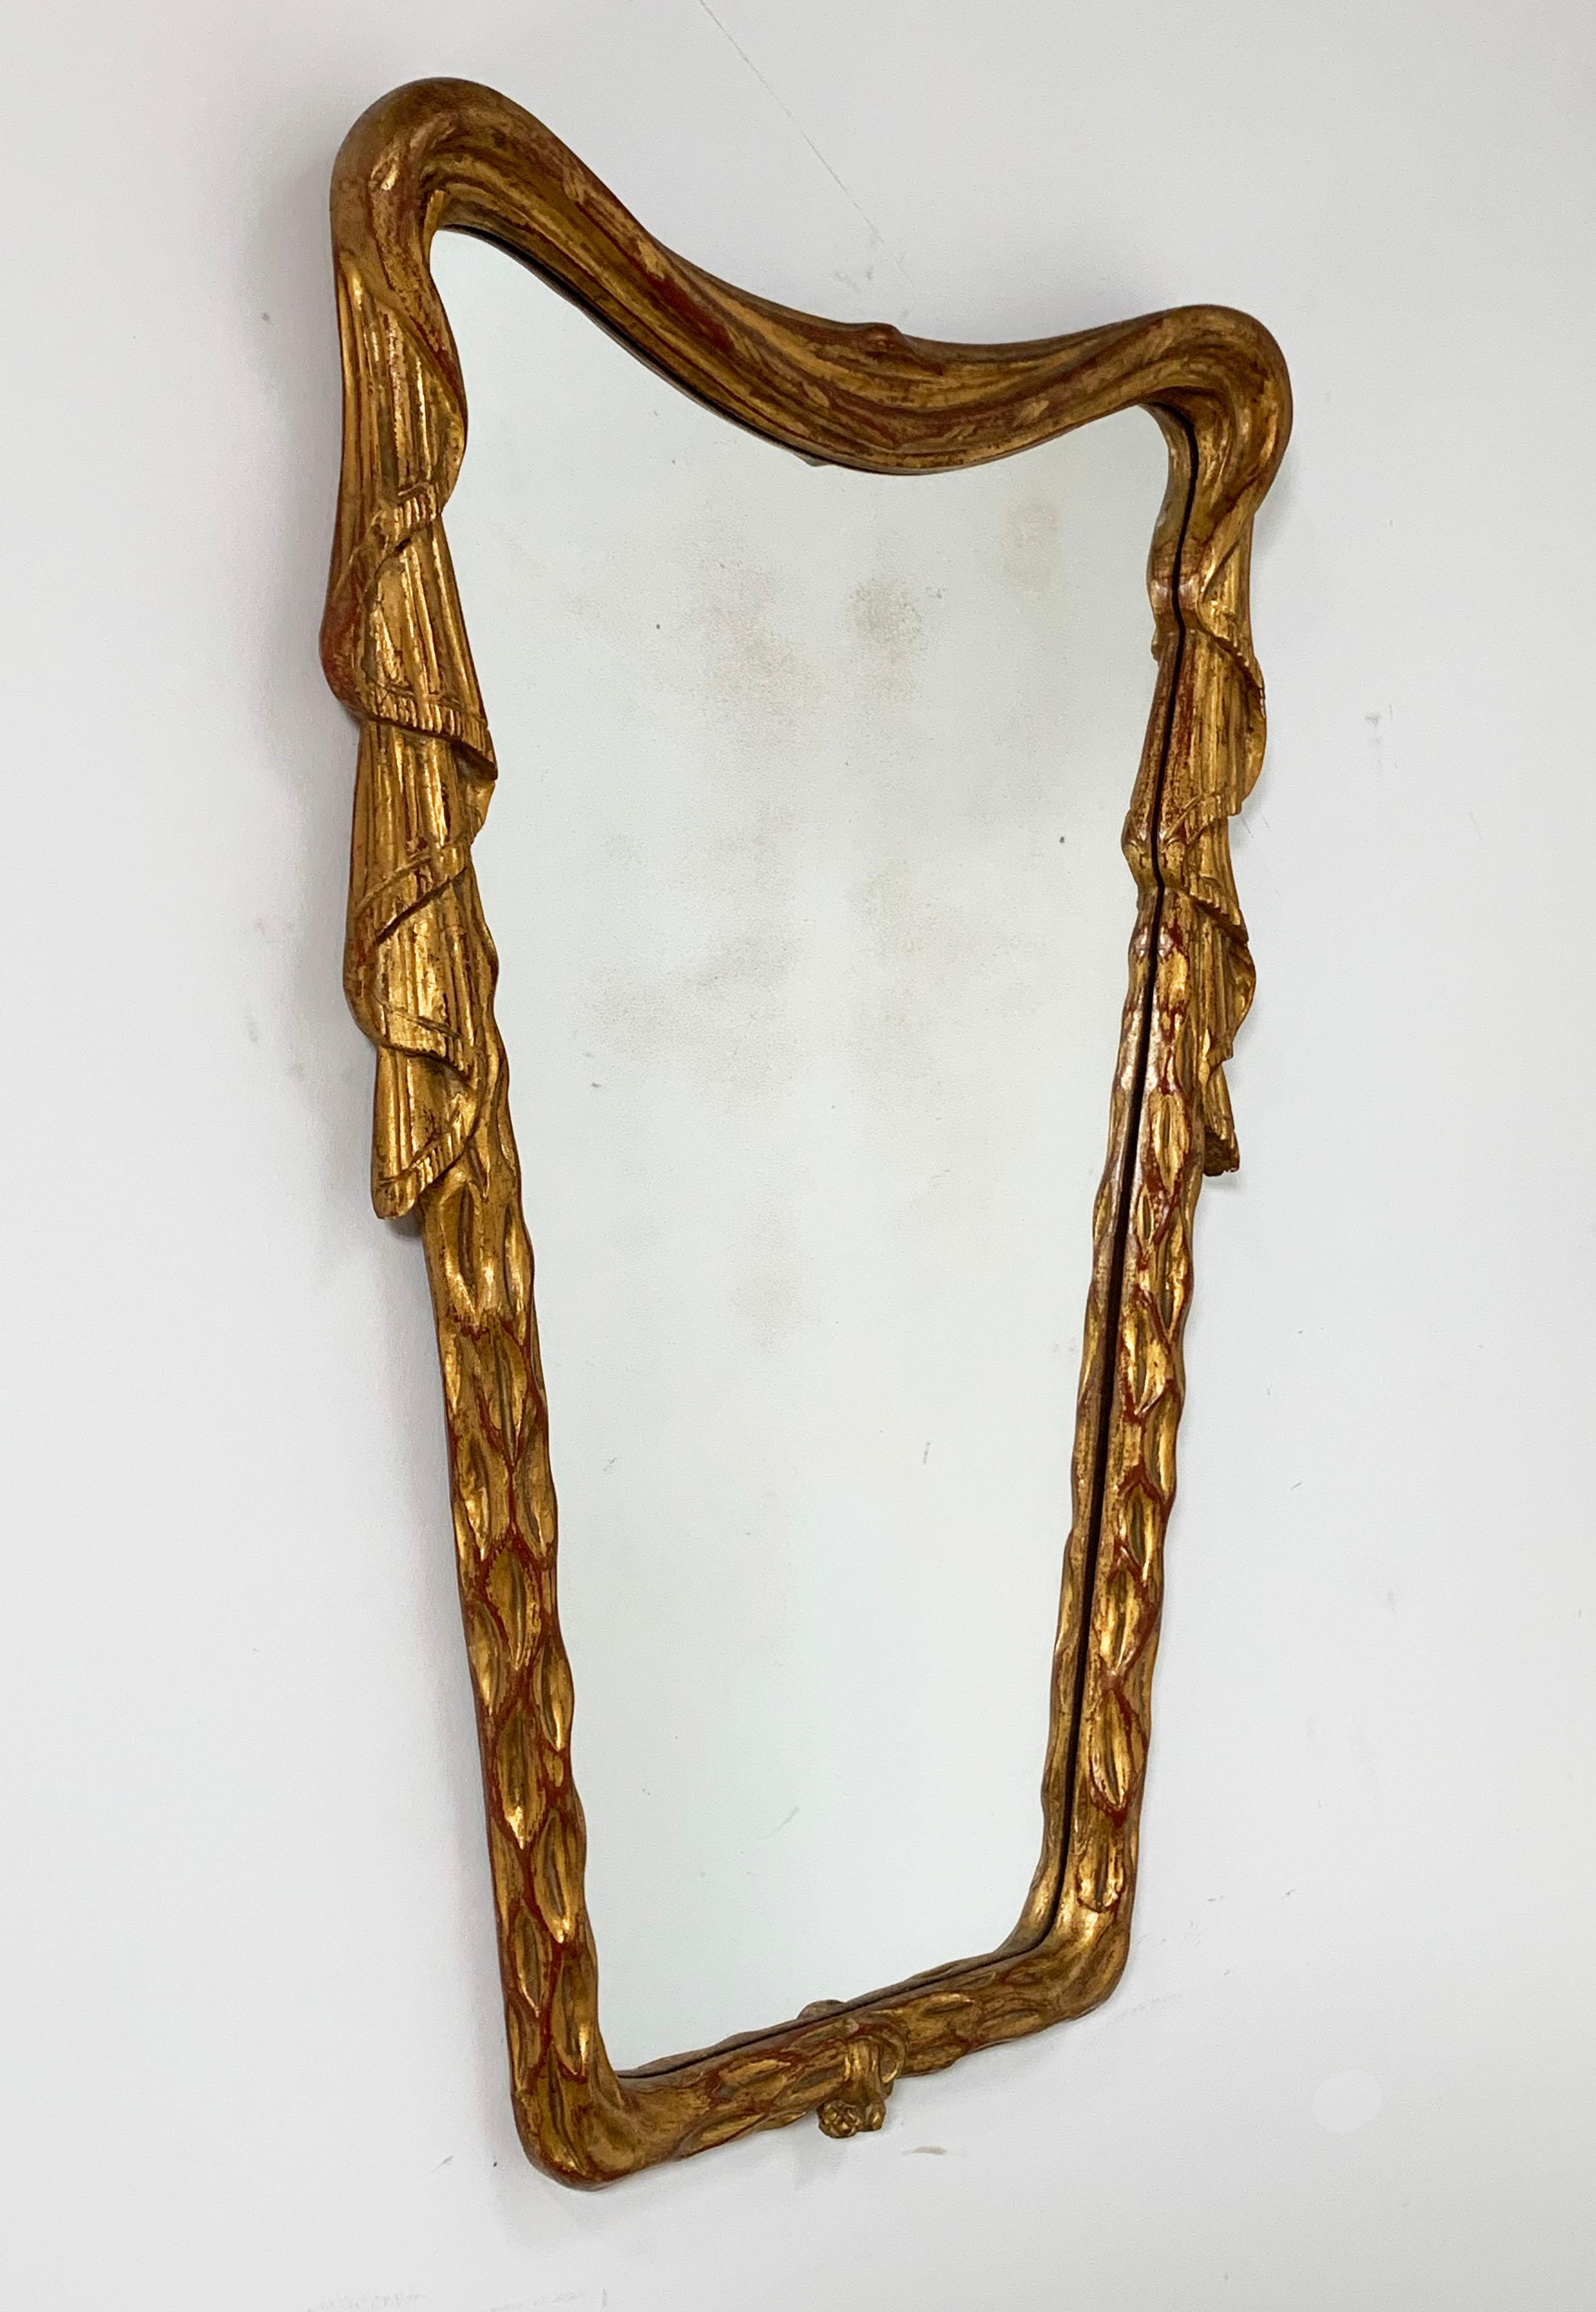 A dramatic Italian hand carved and giltwood mirror of draped trapezoidal form, circa 1930s. Measures: 21.75” wide x 33” long.